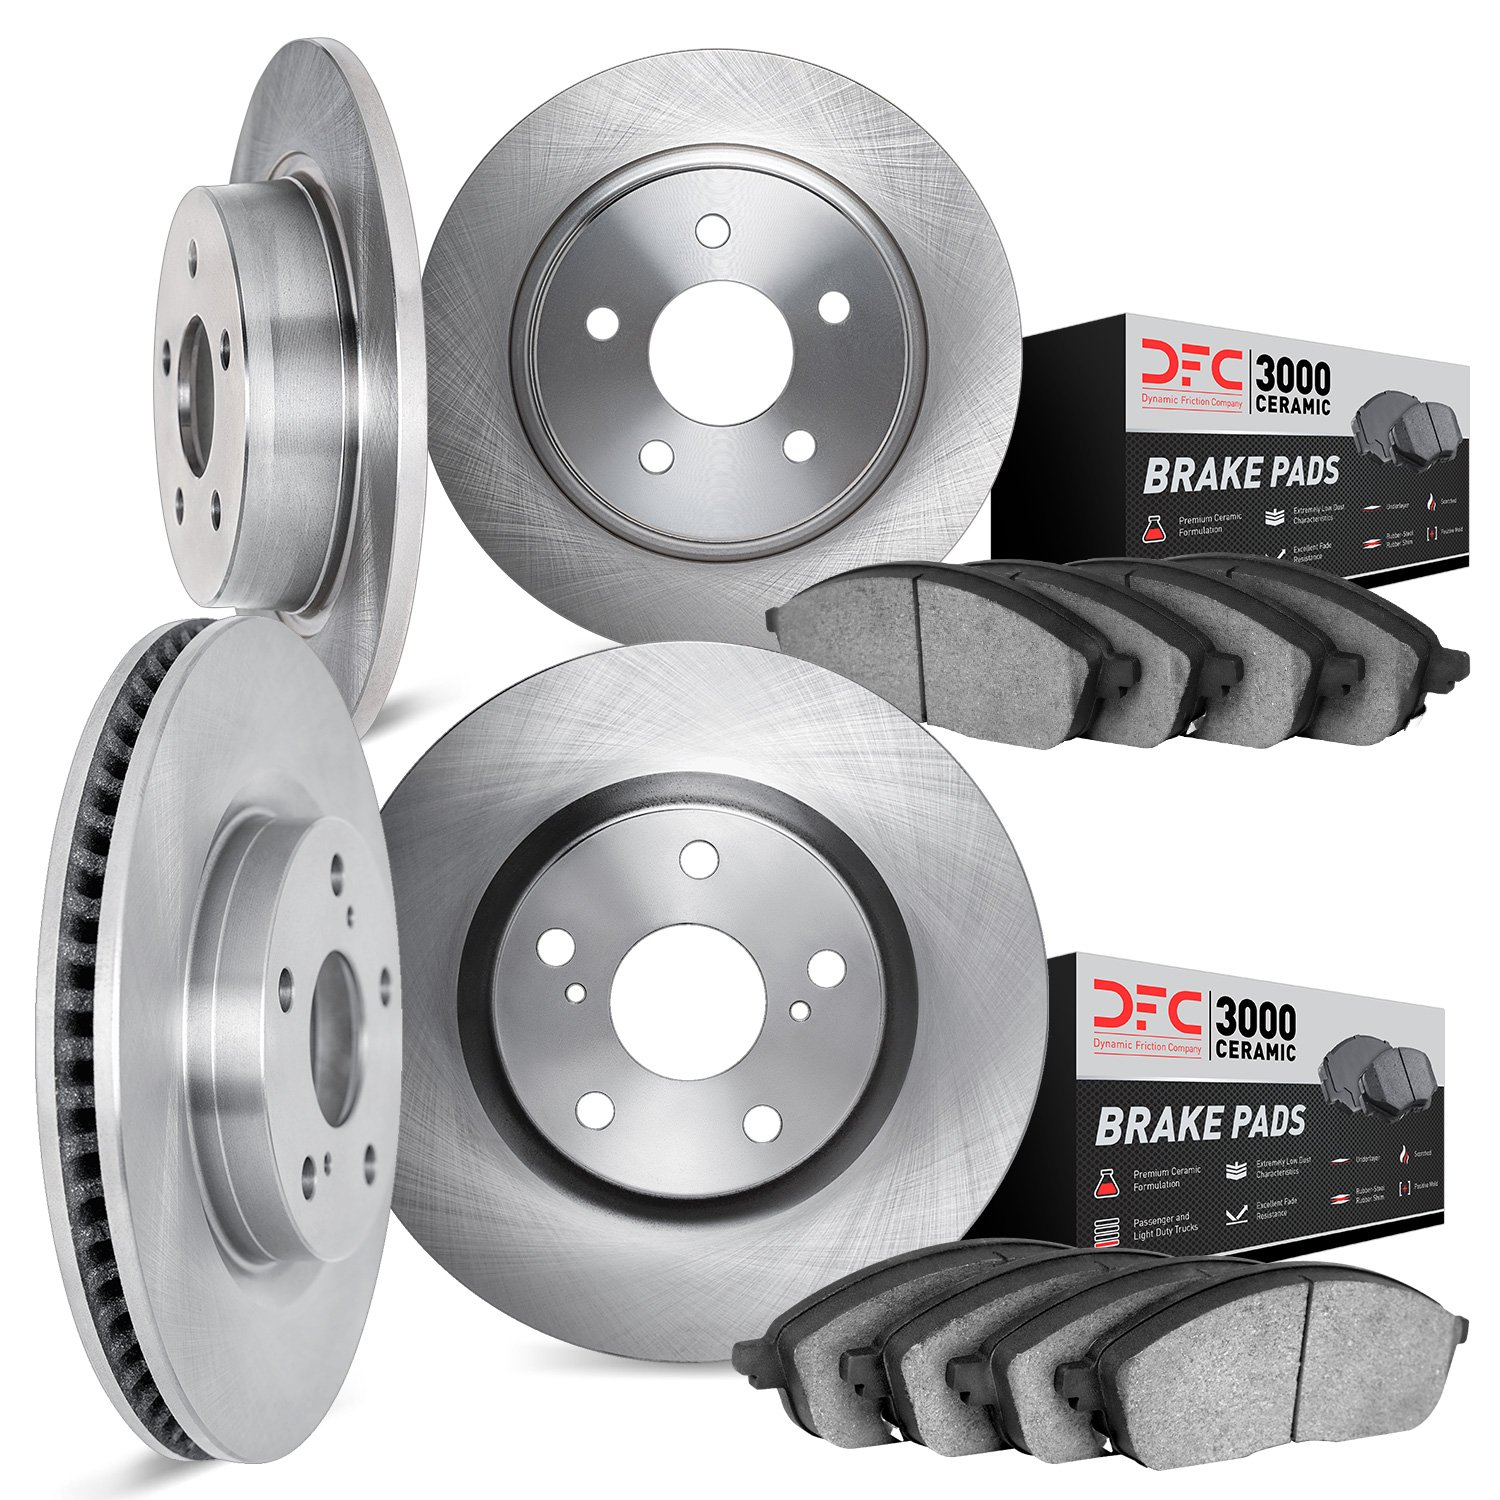 6304-76059 Brake Rotors with 3000-Series Ceramic Brake Pads Kit, 2004-2004 Lexus/Toyota/Scion, Position: Front and Rear